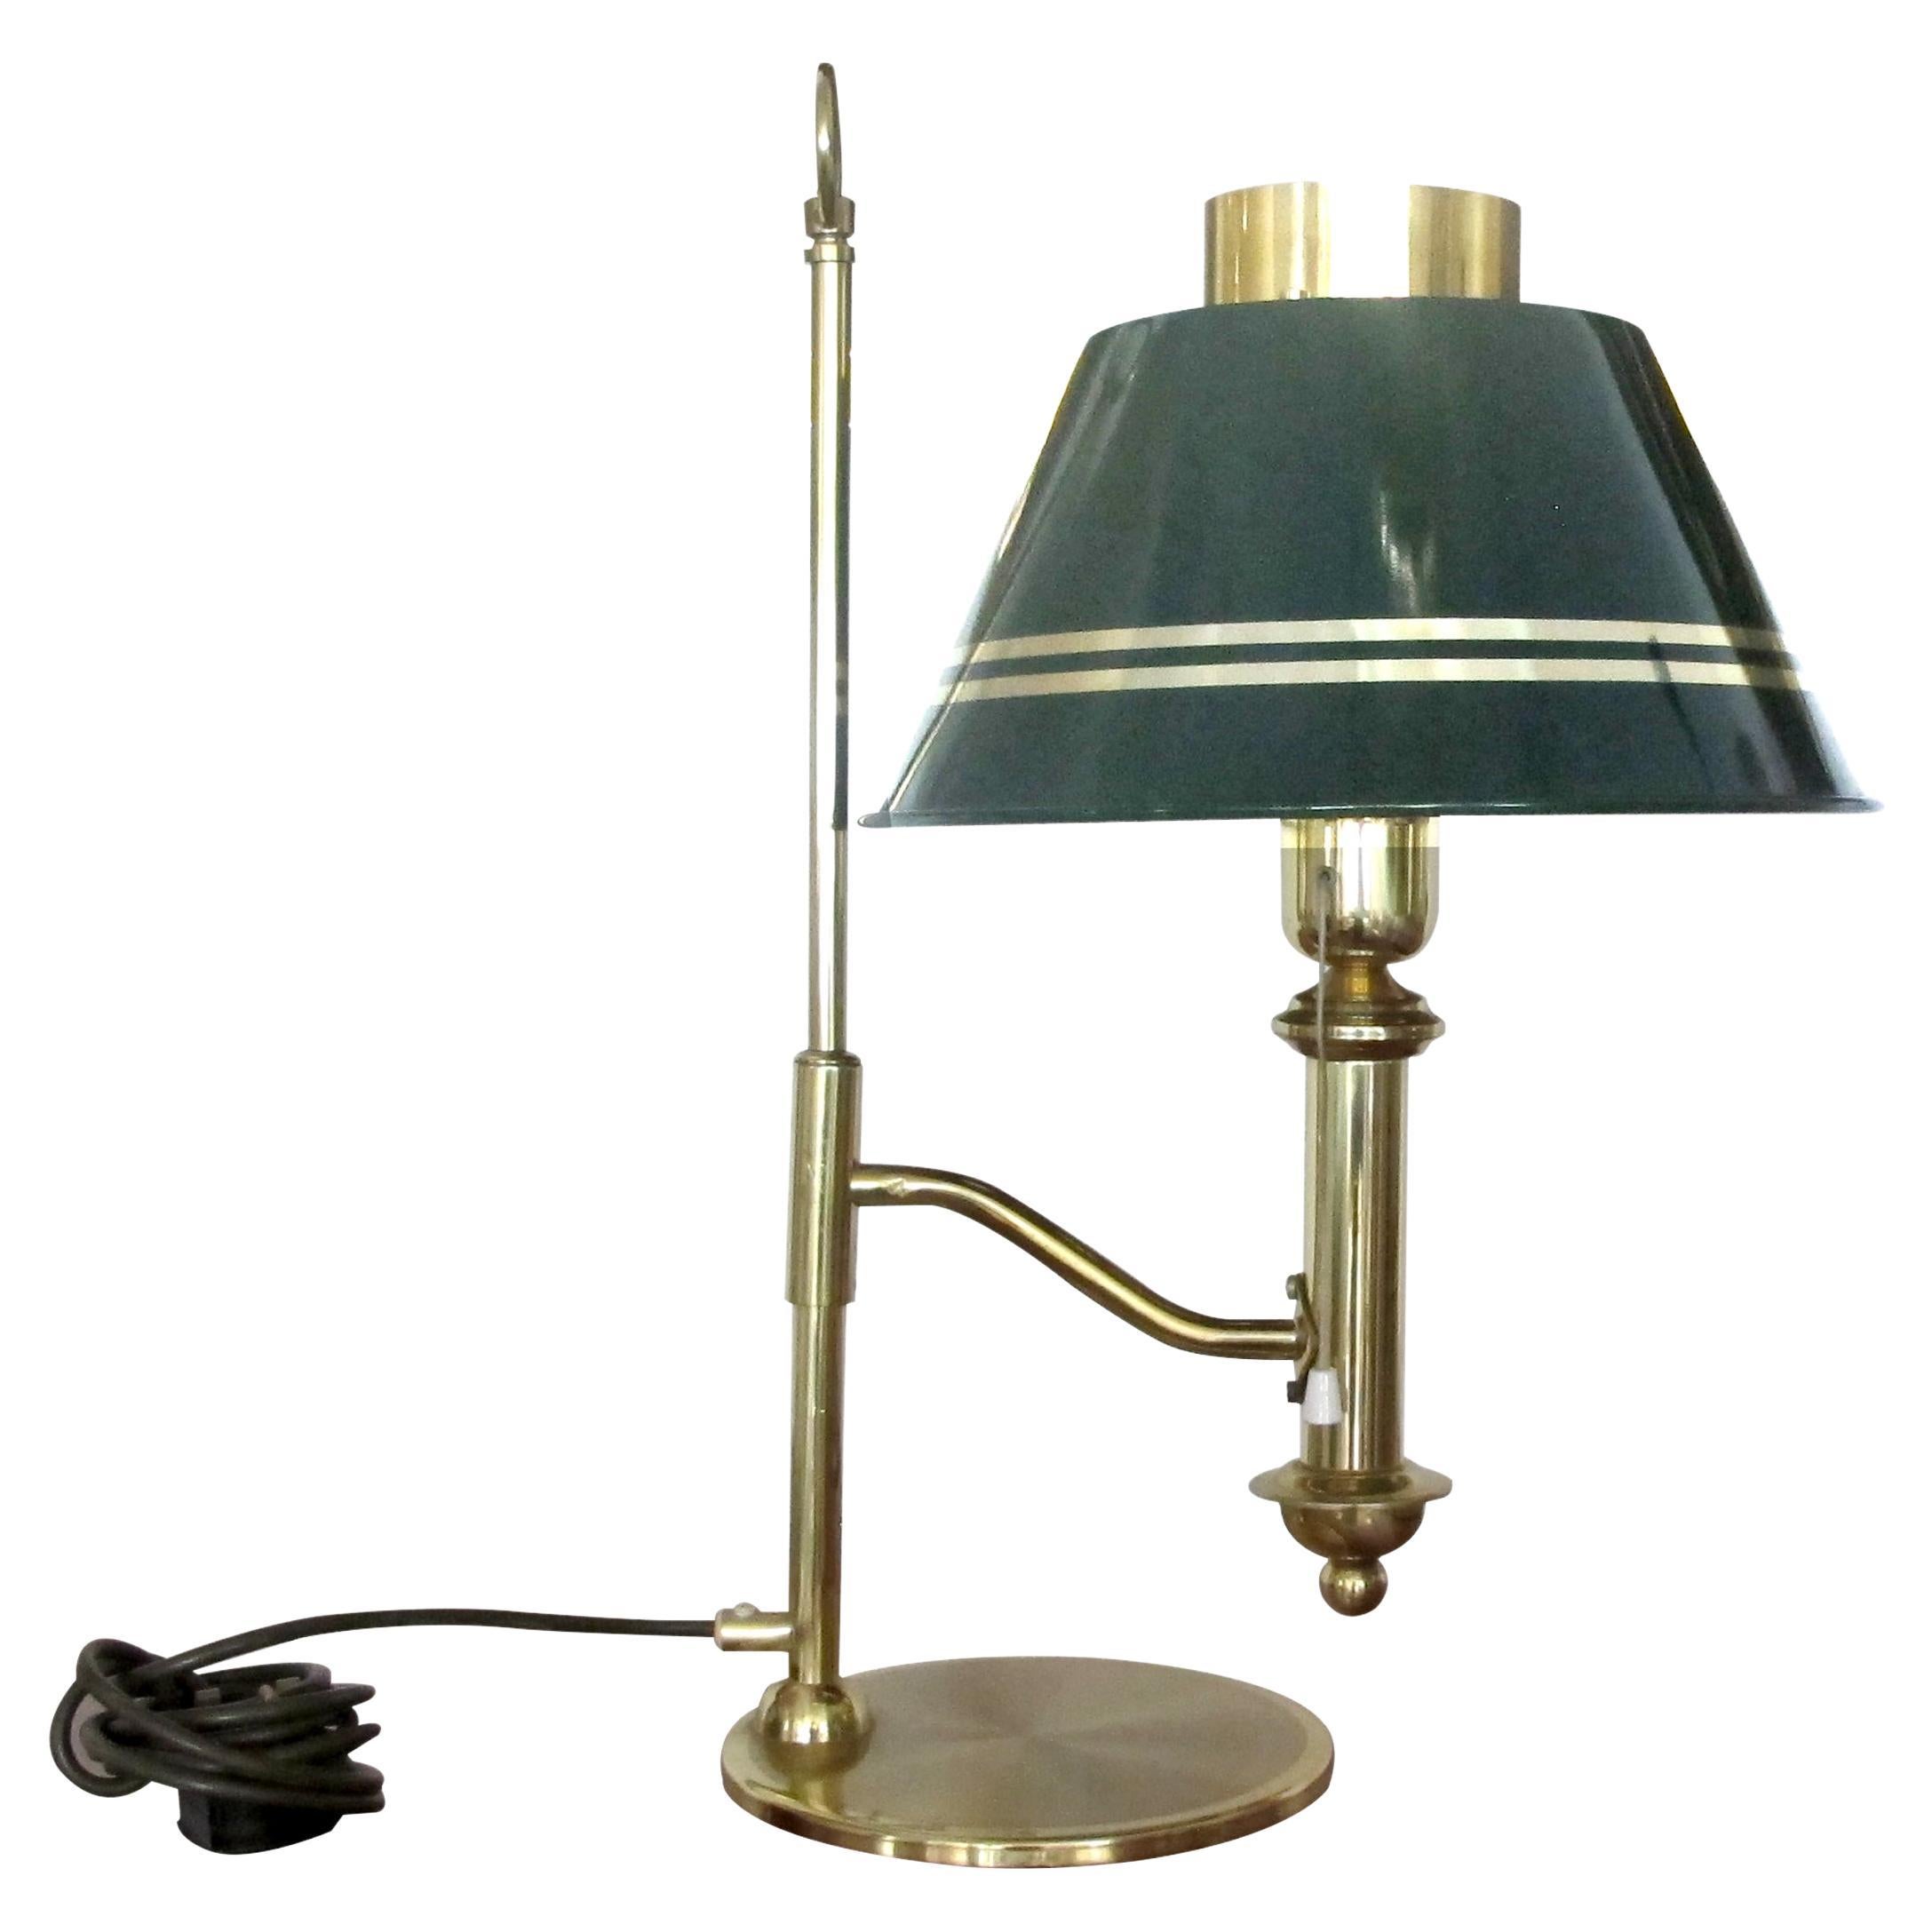 1970s Large Brass Desk Table Lamp with Green Metal Shade, Swedish